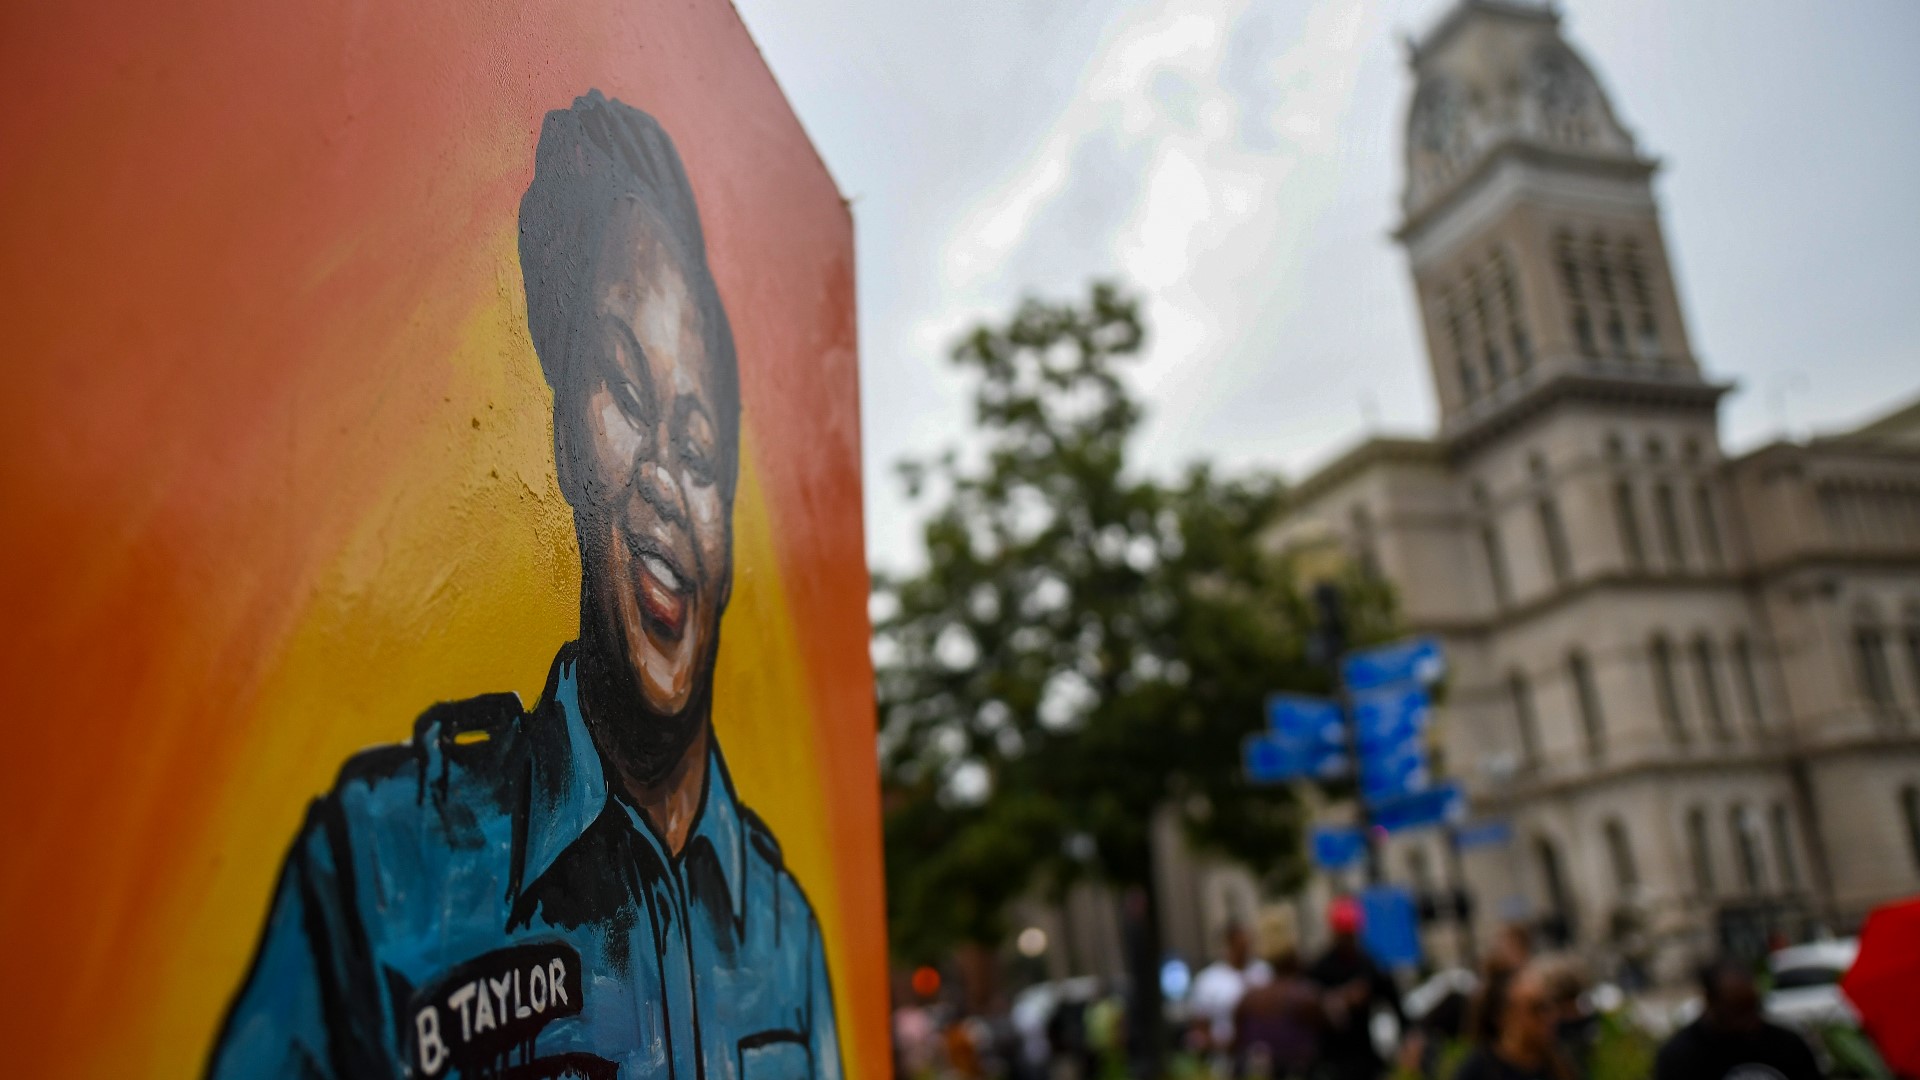 Jefferson Square Park was the centerpiece of the 2020 protests for Breonna Taylor. Now, it's taken on a different tone.